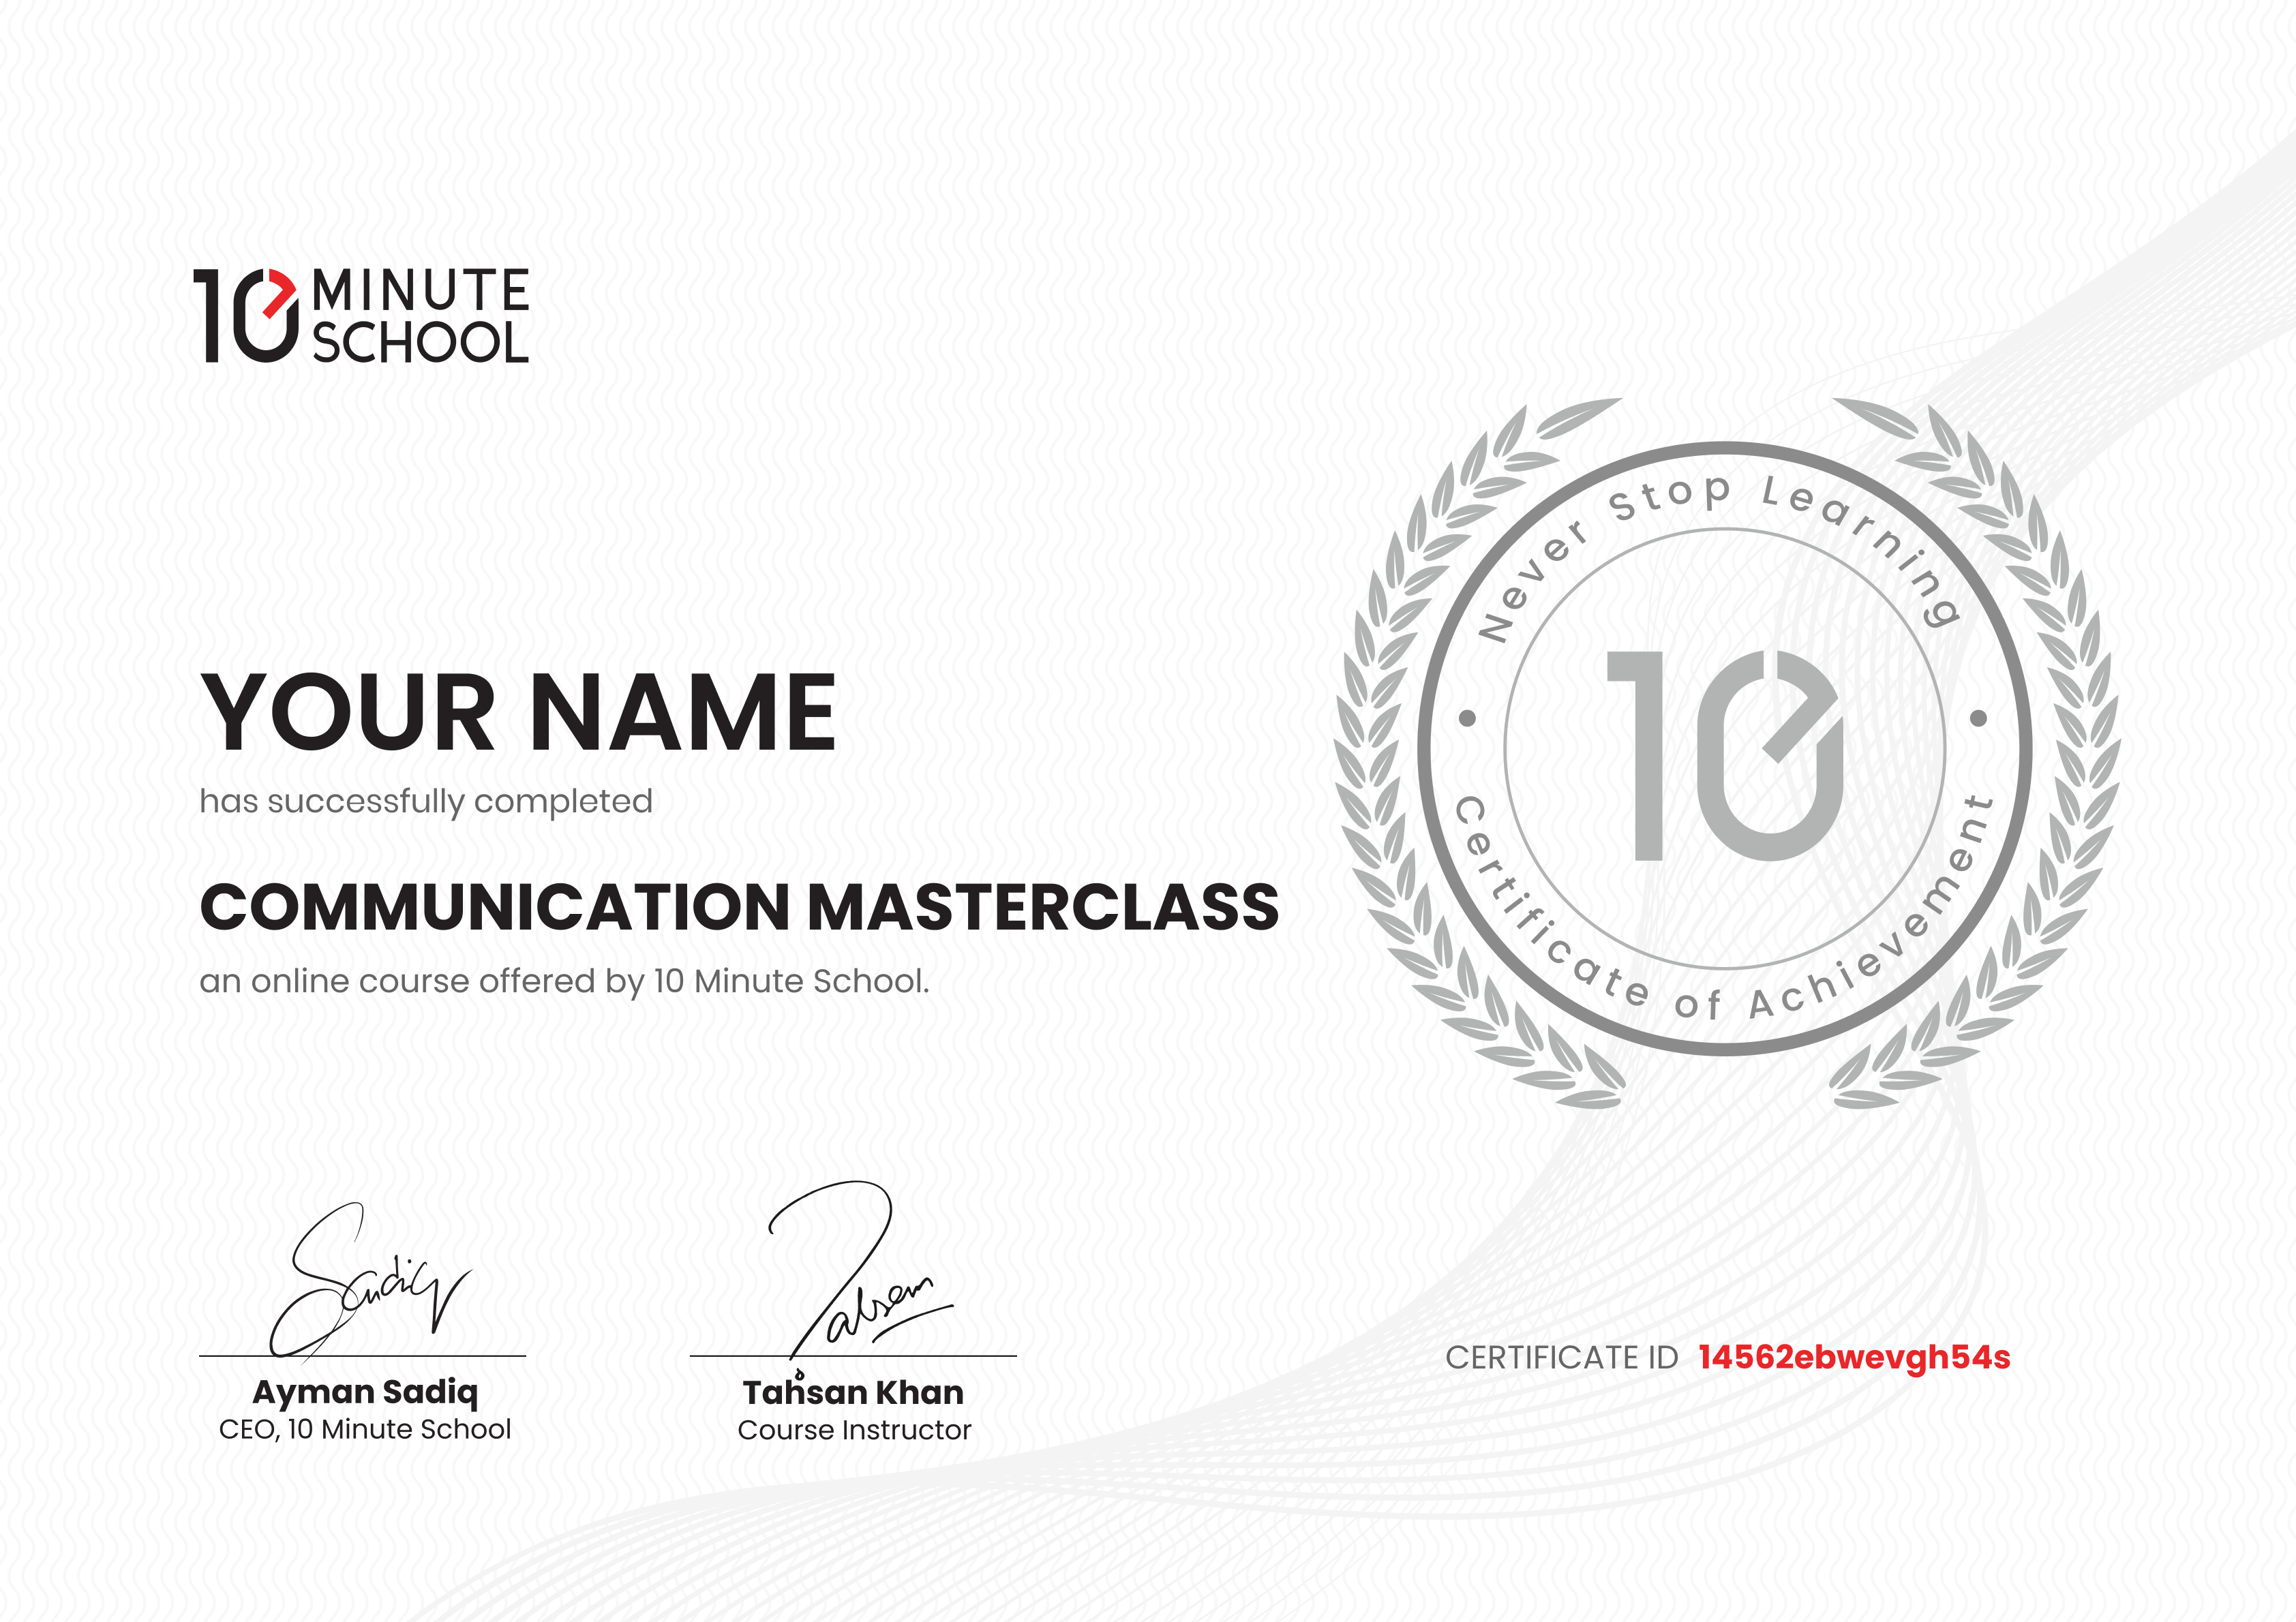 Certificate for Communication Masterclass by Tahsan Khan